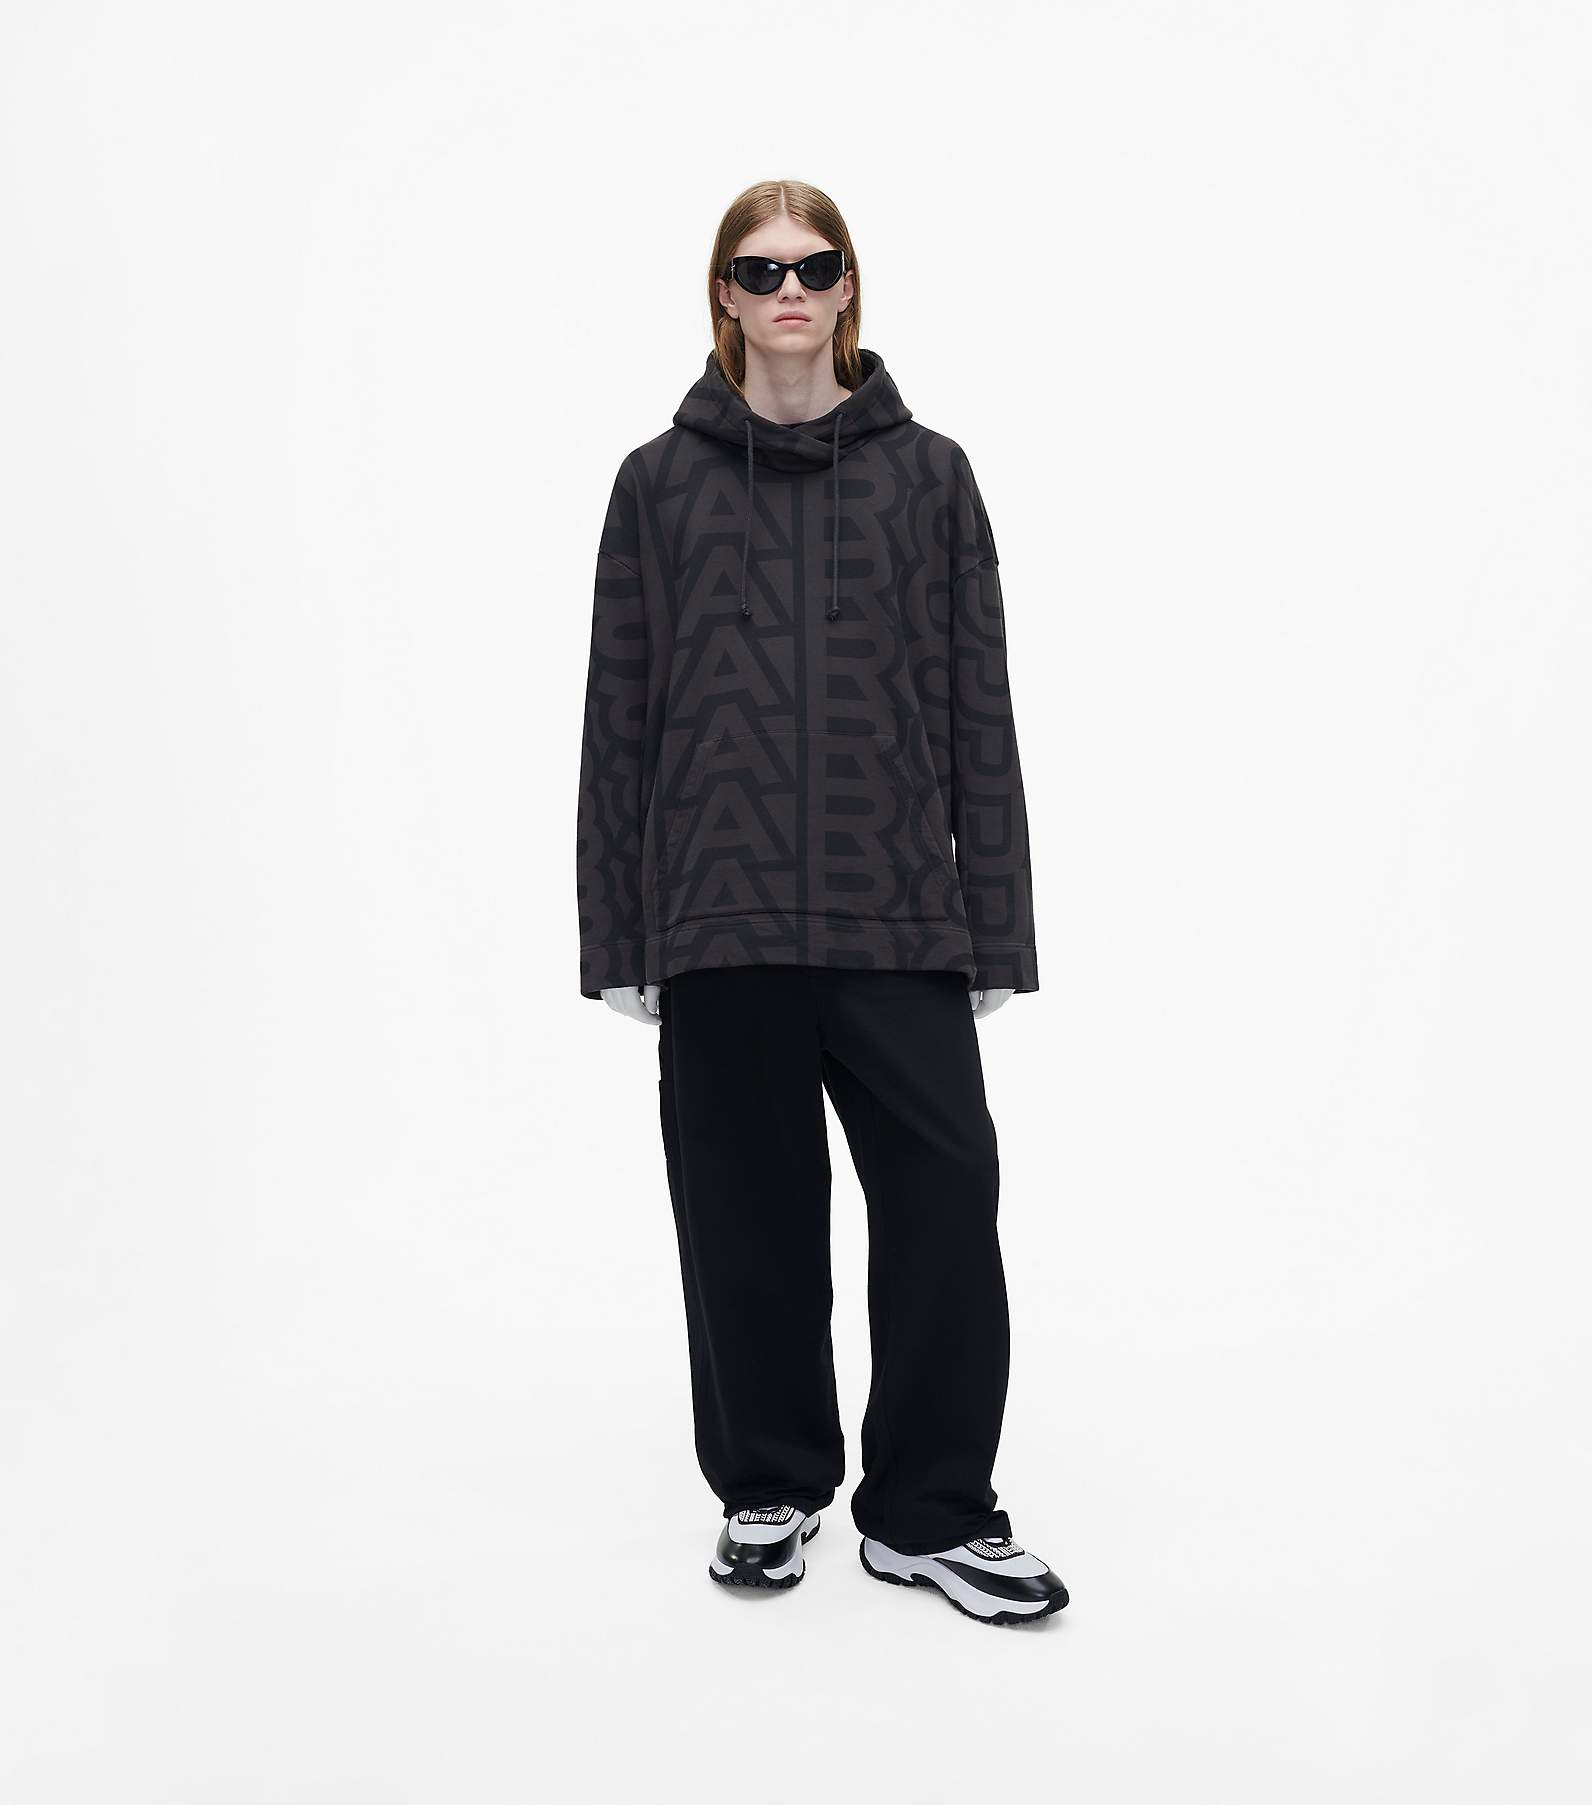 The Lazy Runner | Marc Jacobs | Official Site